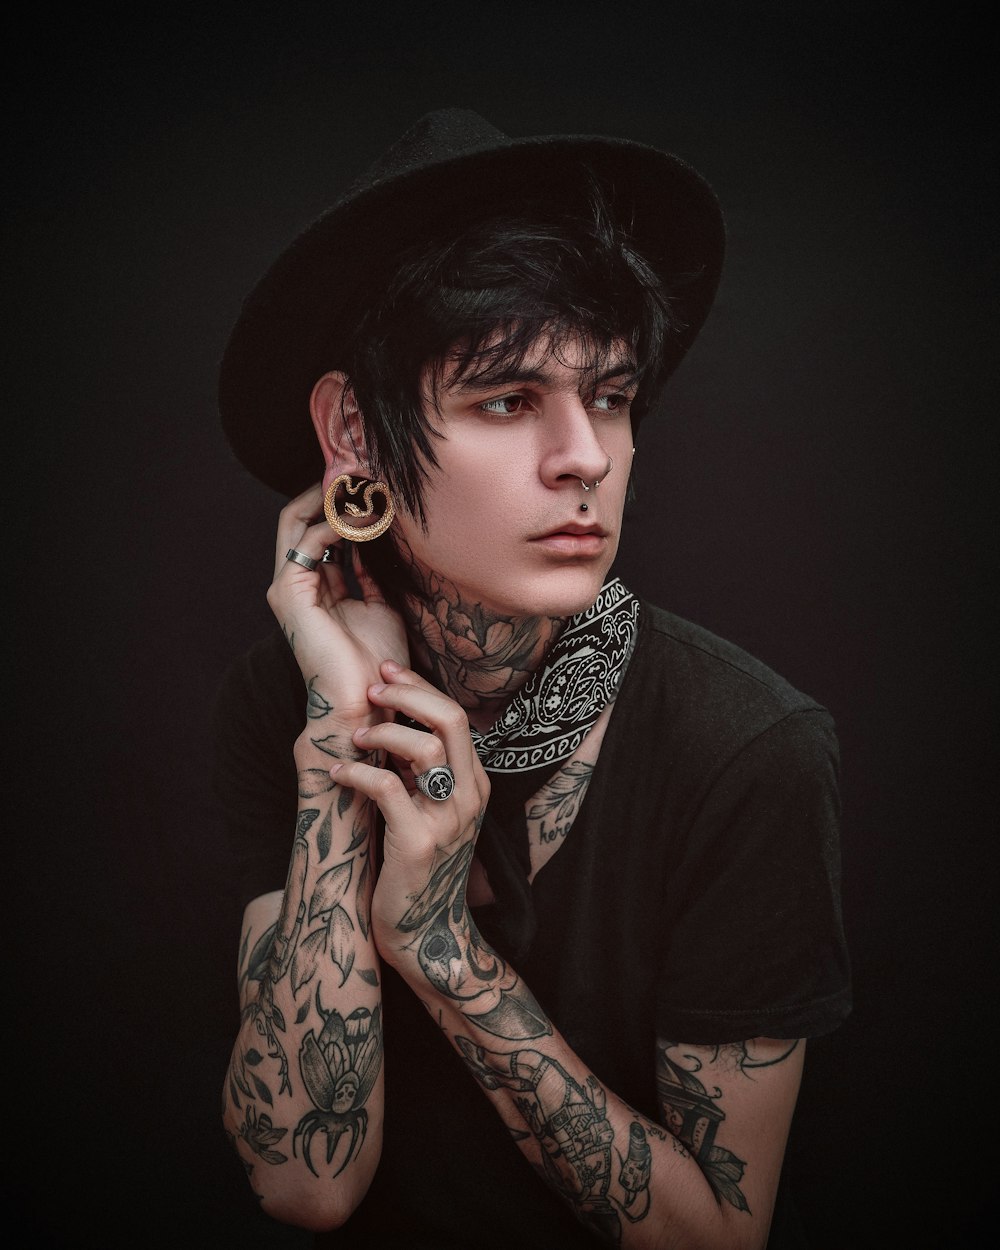 a man with tattoos wearing a black hat